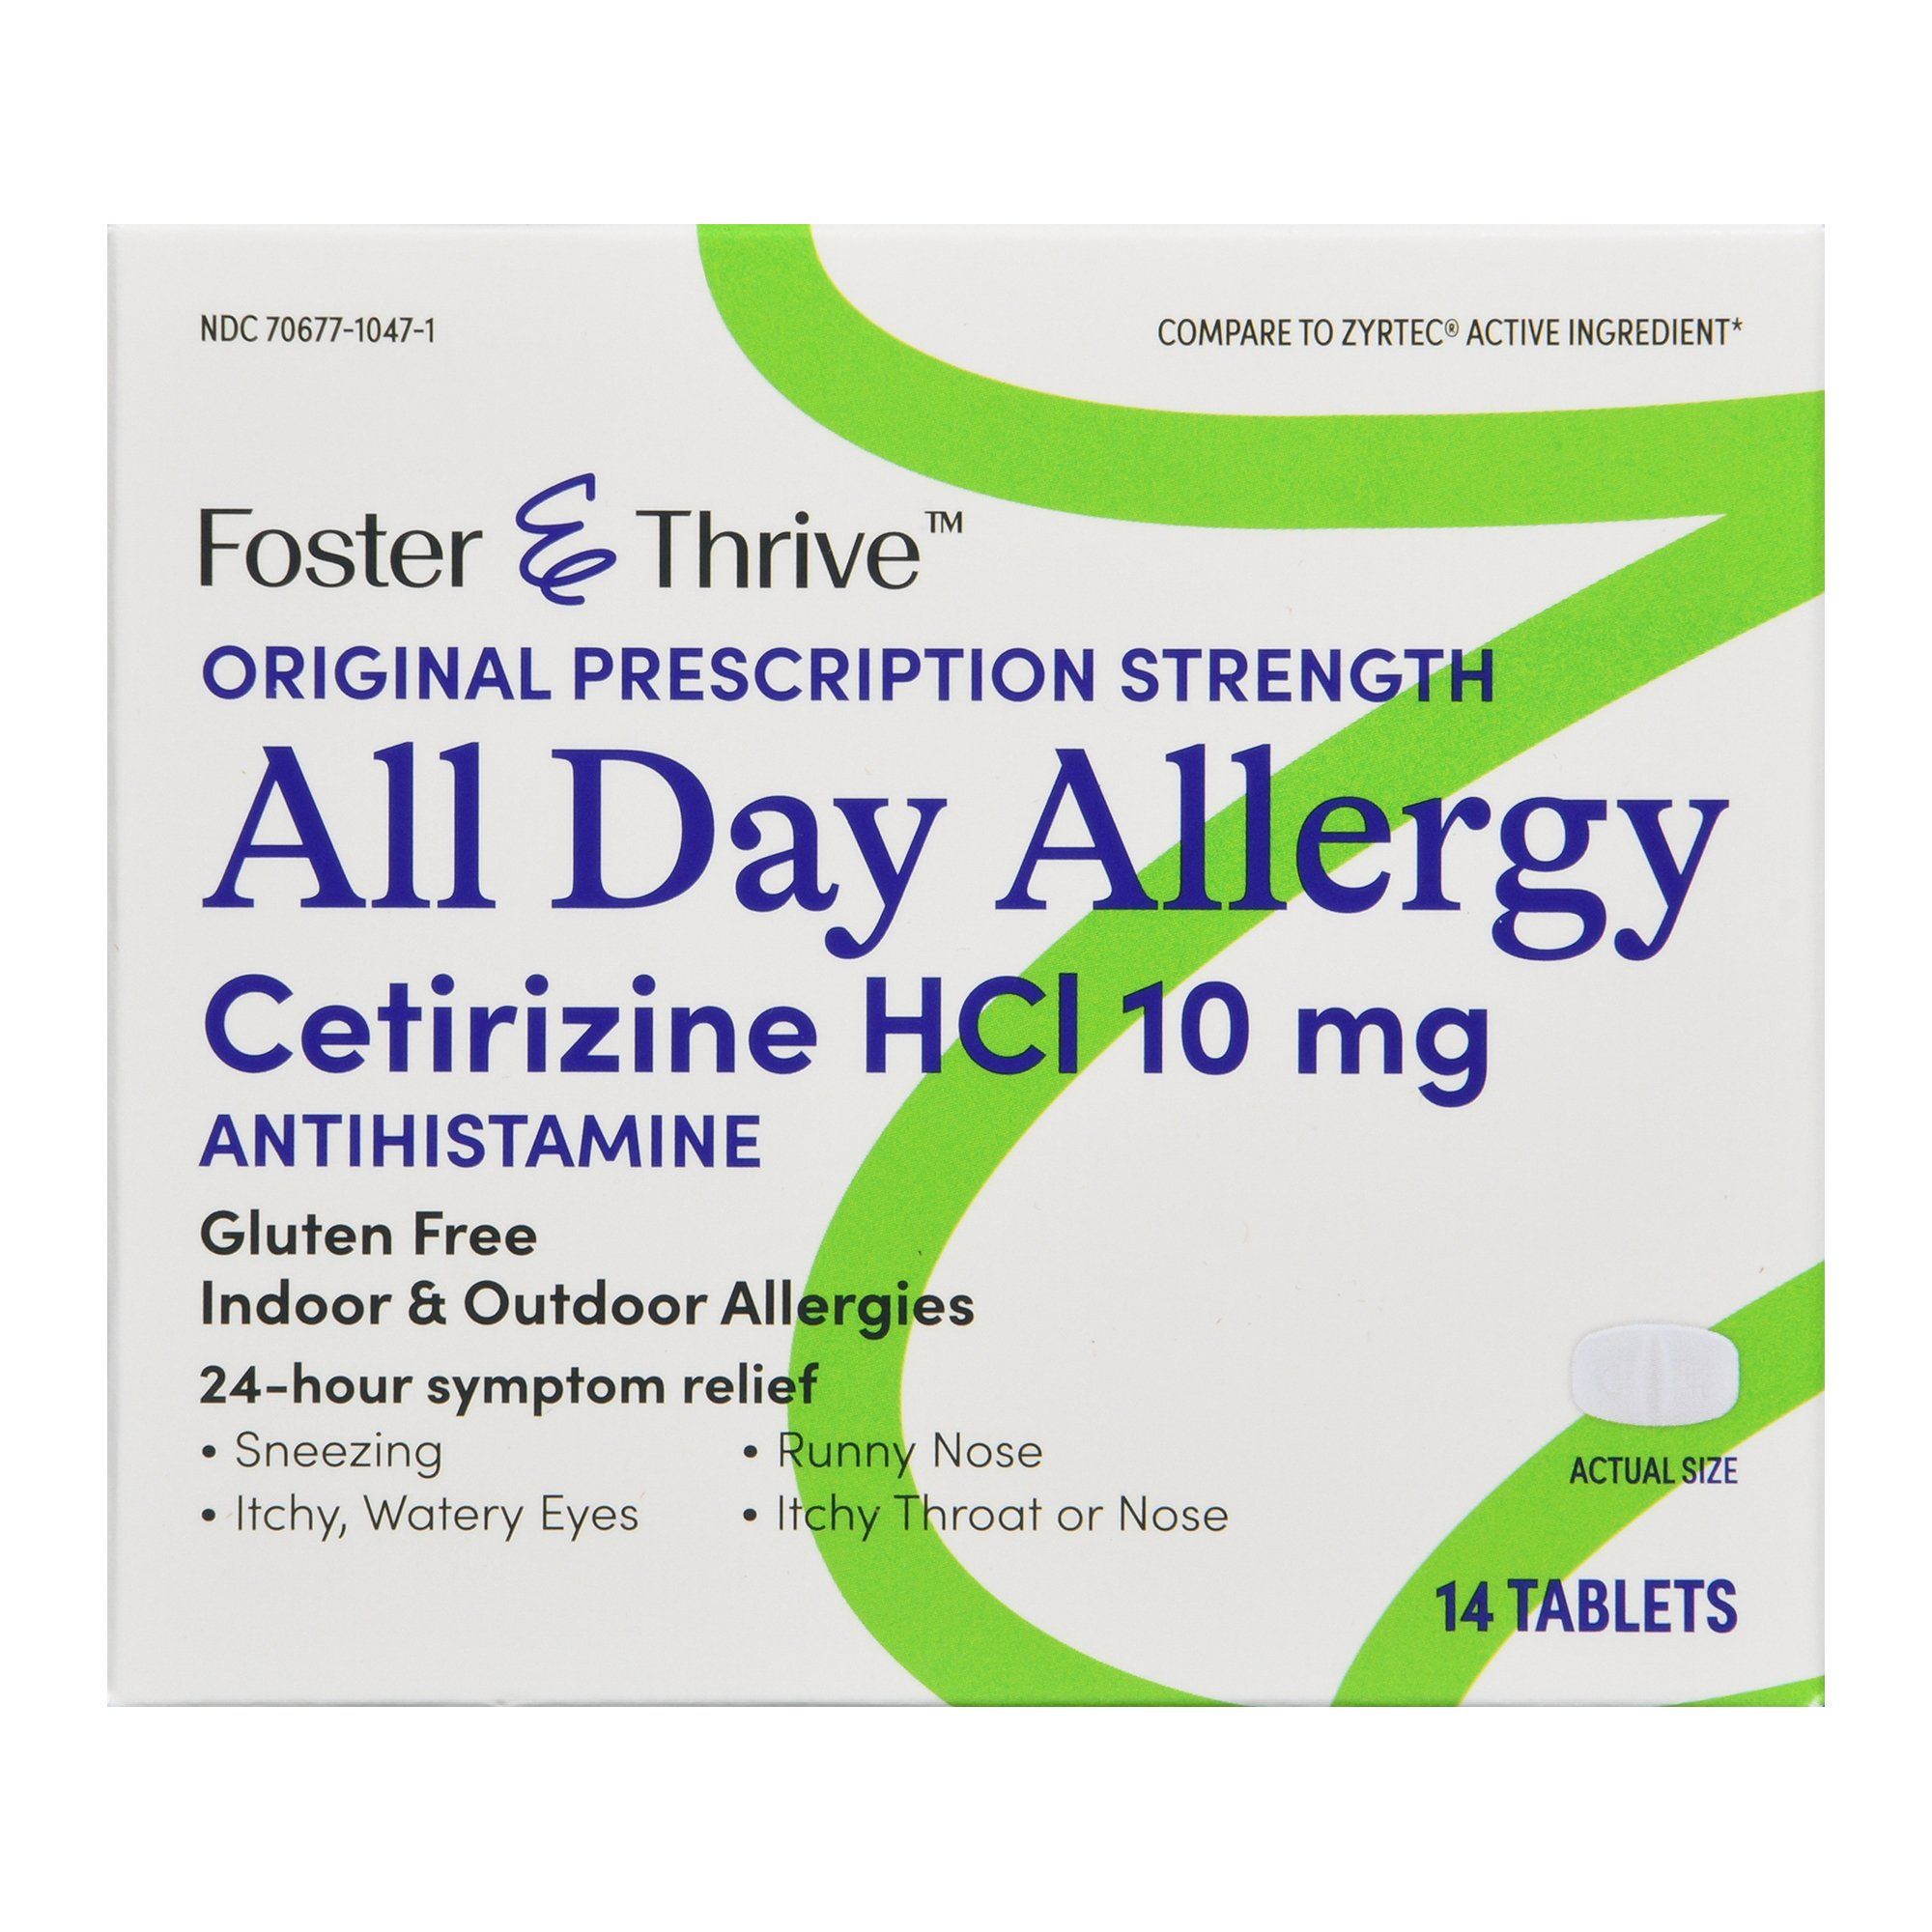 Foster & Thrive Original Prescription Strength All Day Allergy Cetirizine HCl Tablets,  10 mg - 14 ct